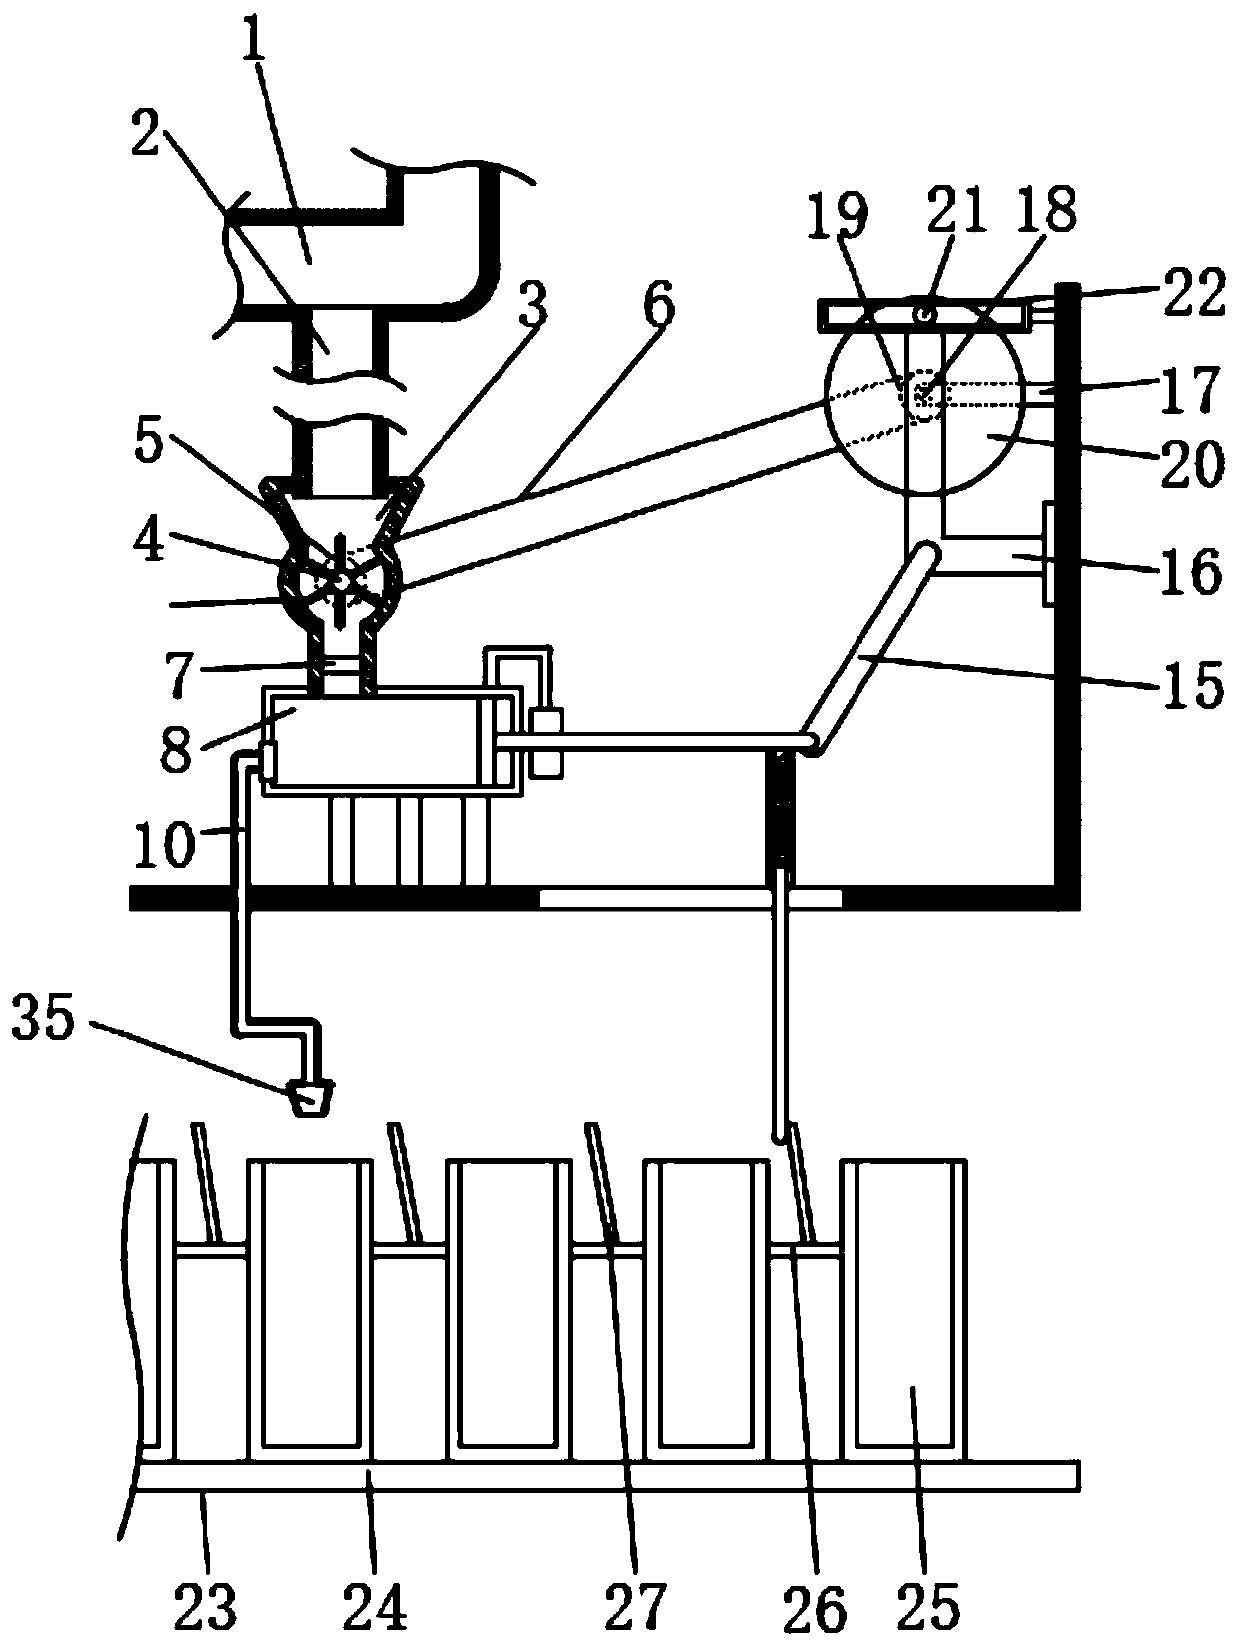 Automatic urine sample collecting system device